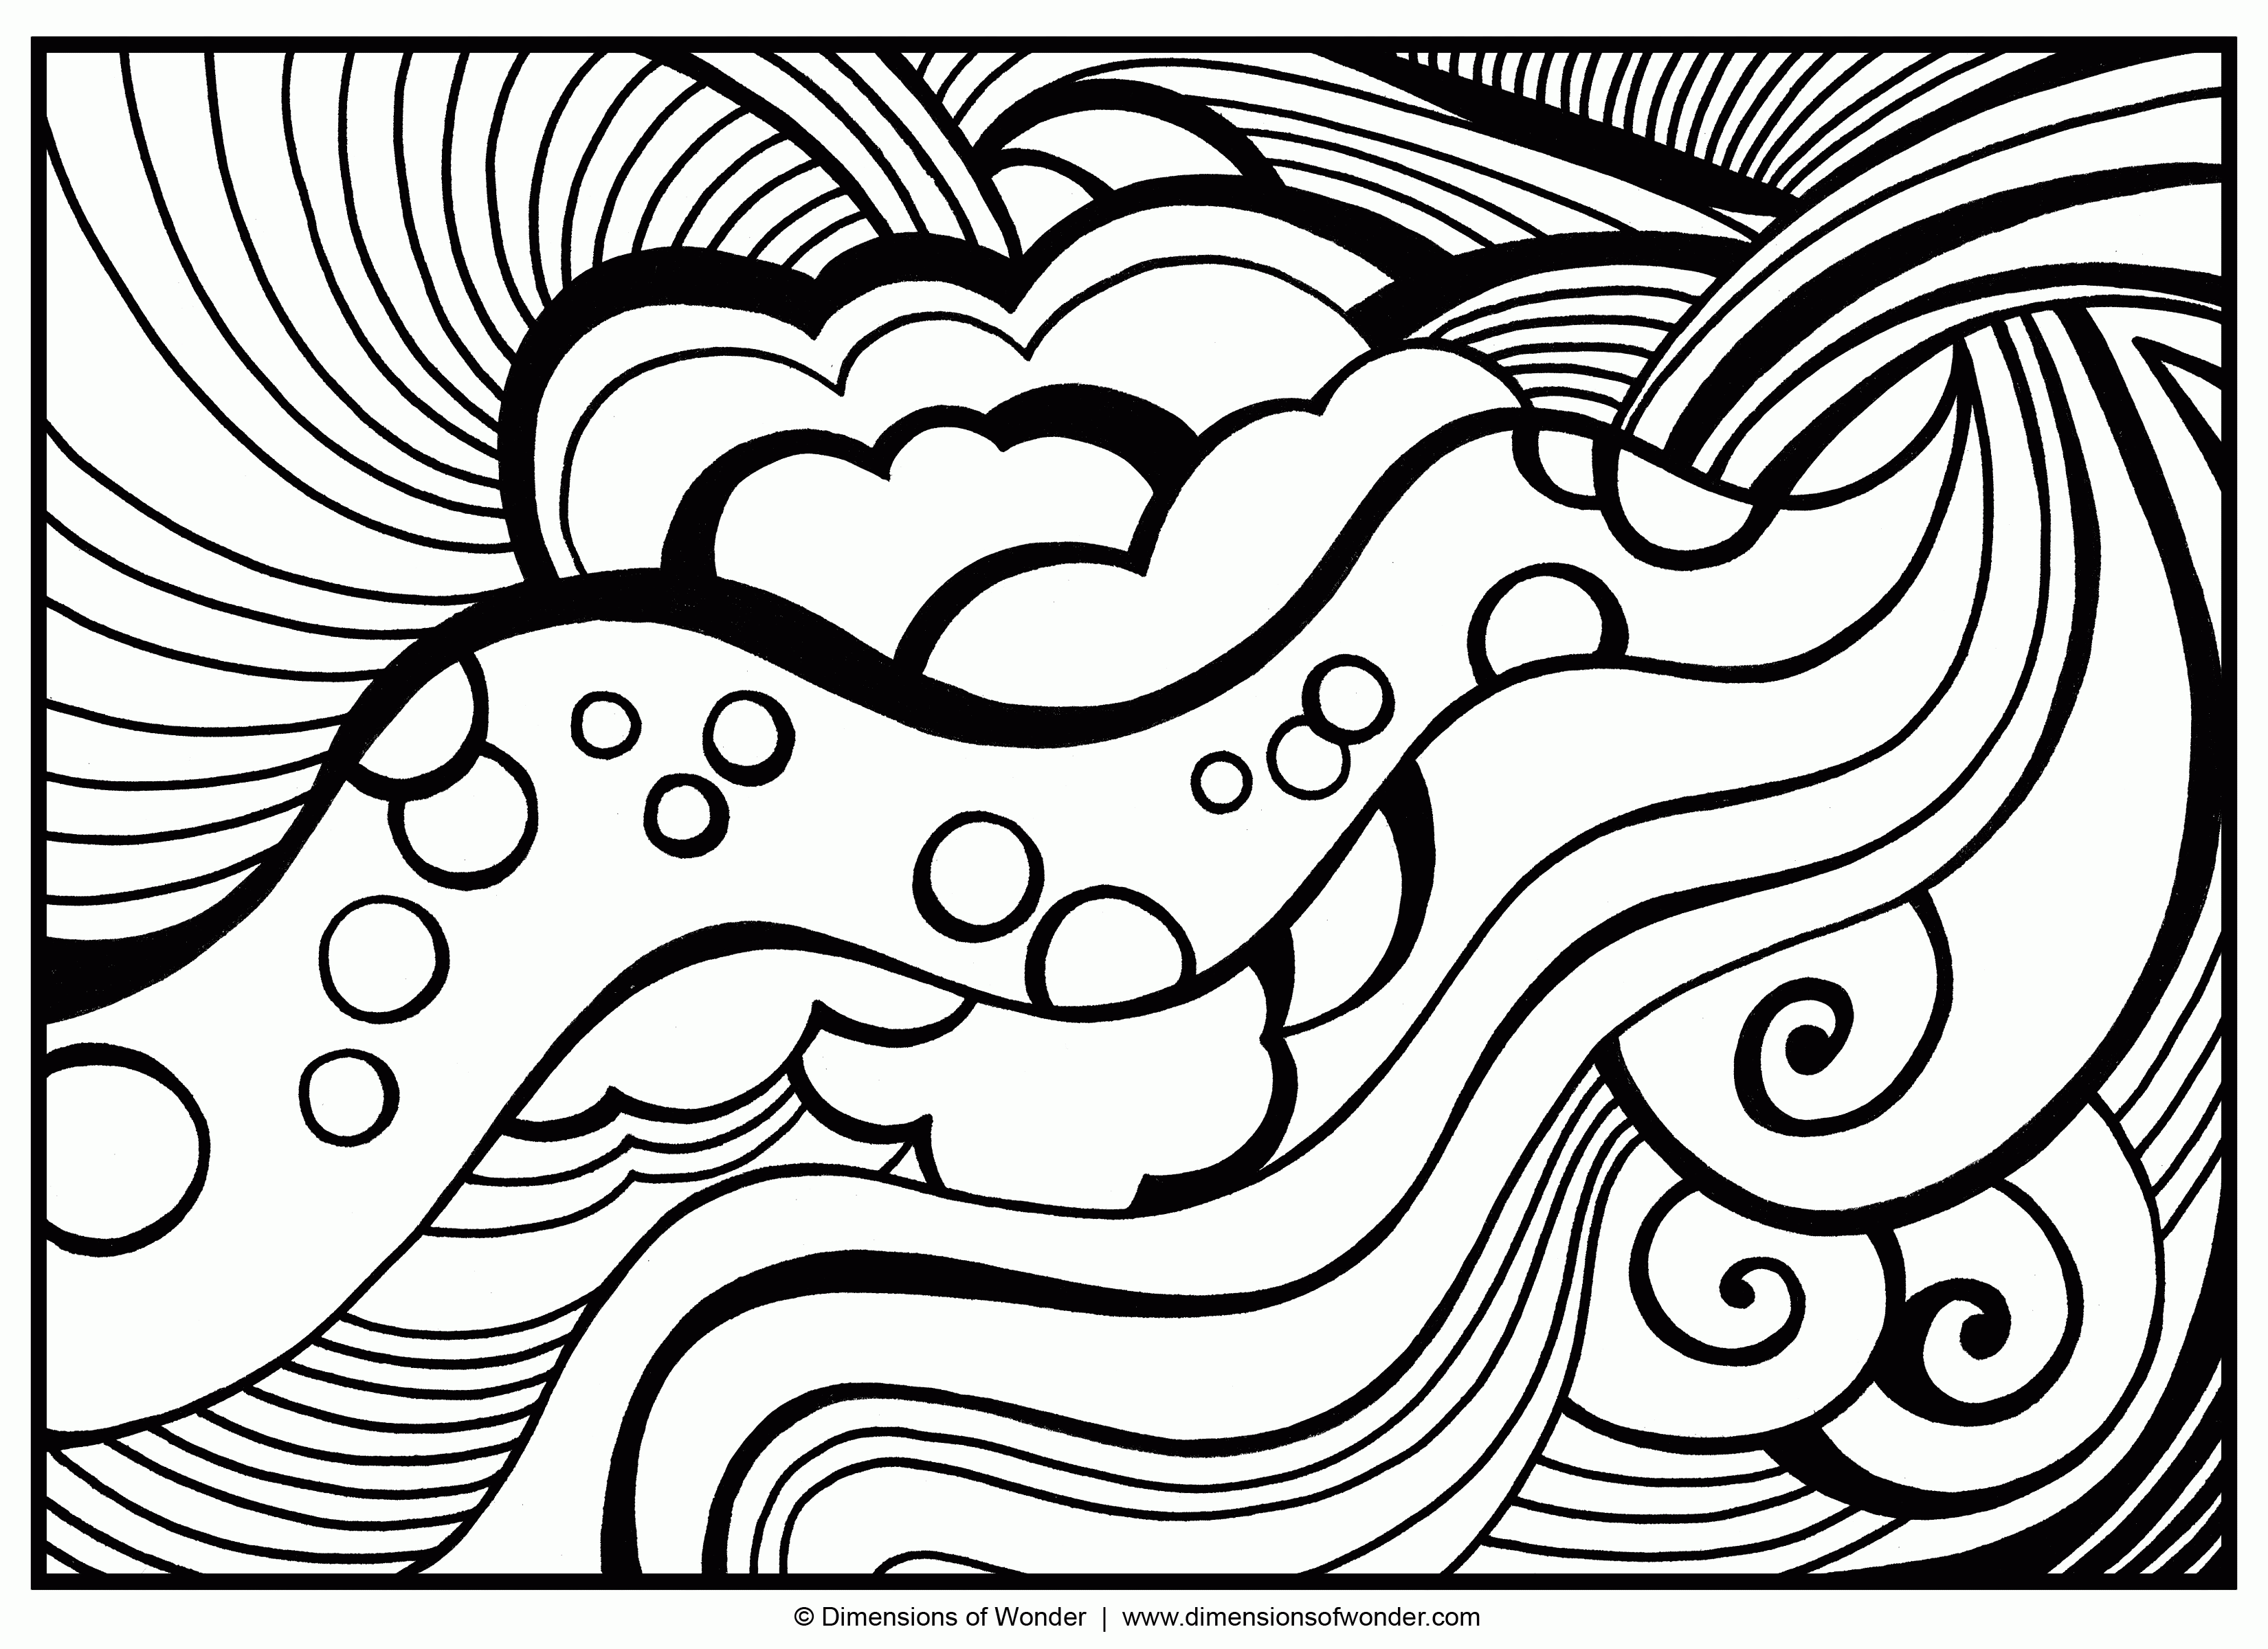 Amazing of Abstract Coloring Pages To Print With Abstract #3280